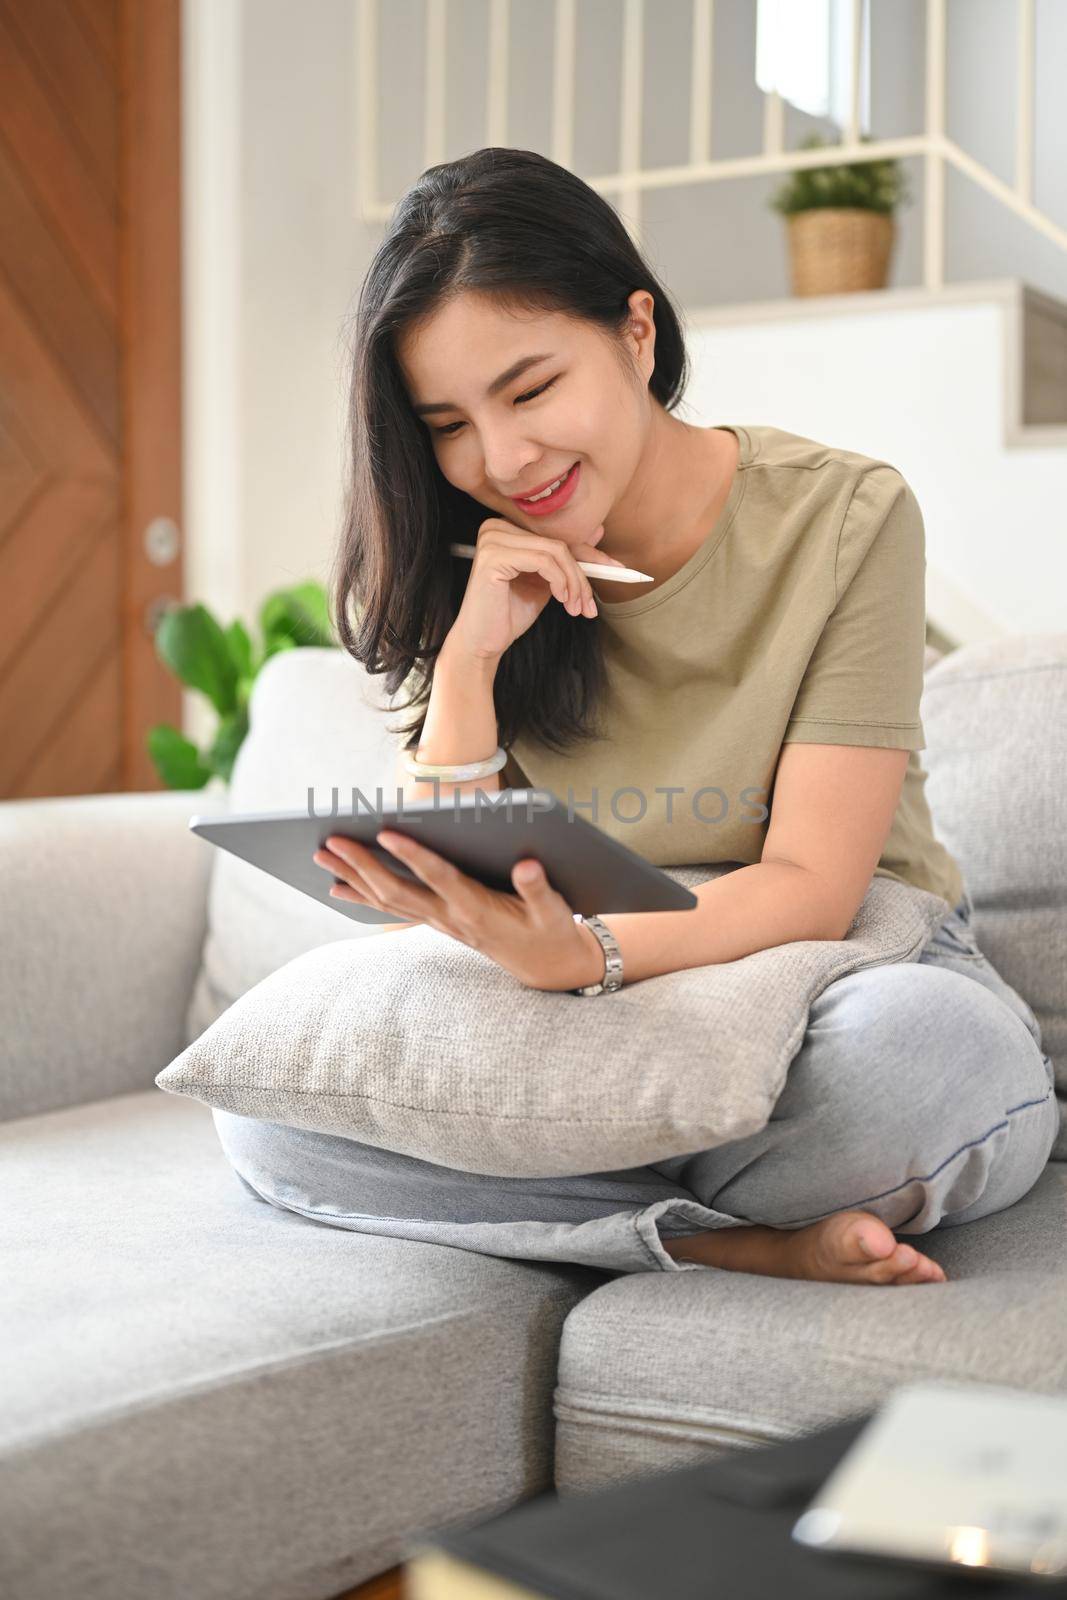 Smiling young woman reading ebook on digital tablet while relaxing in comfortable couch at home.